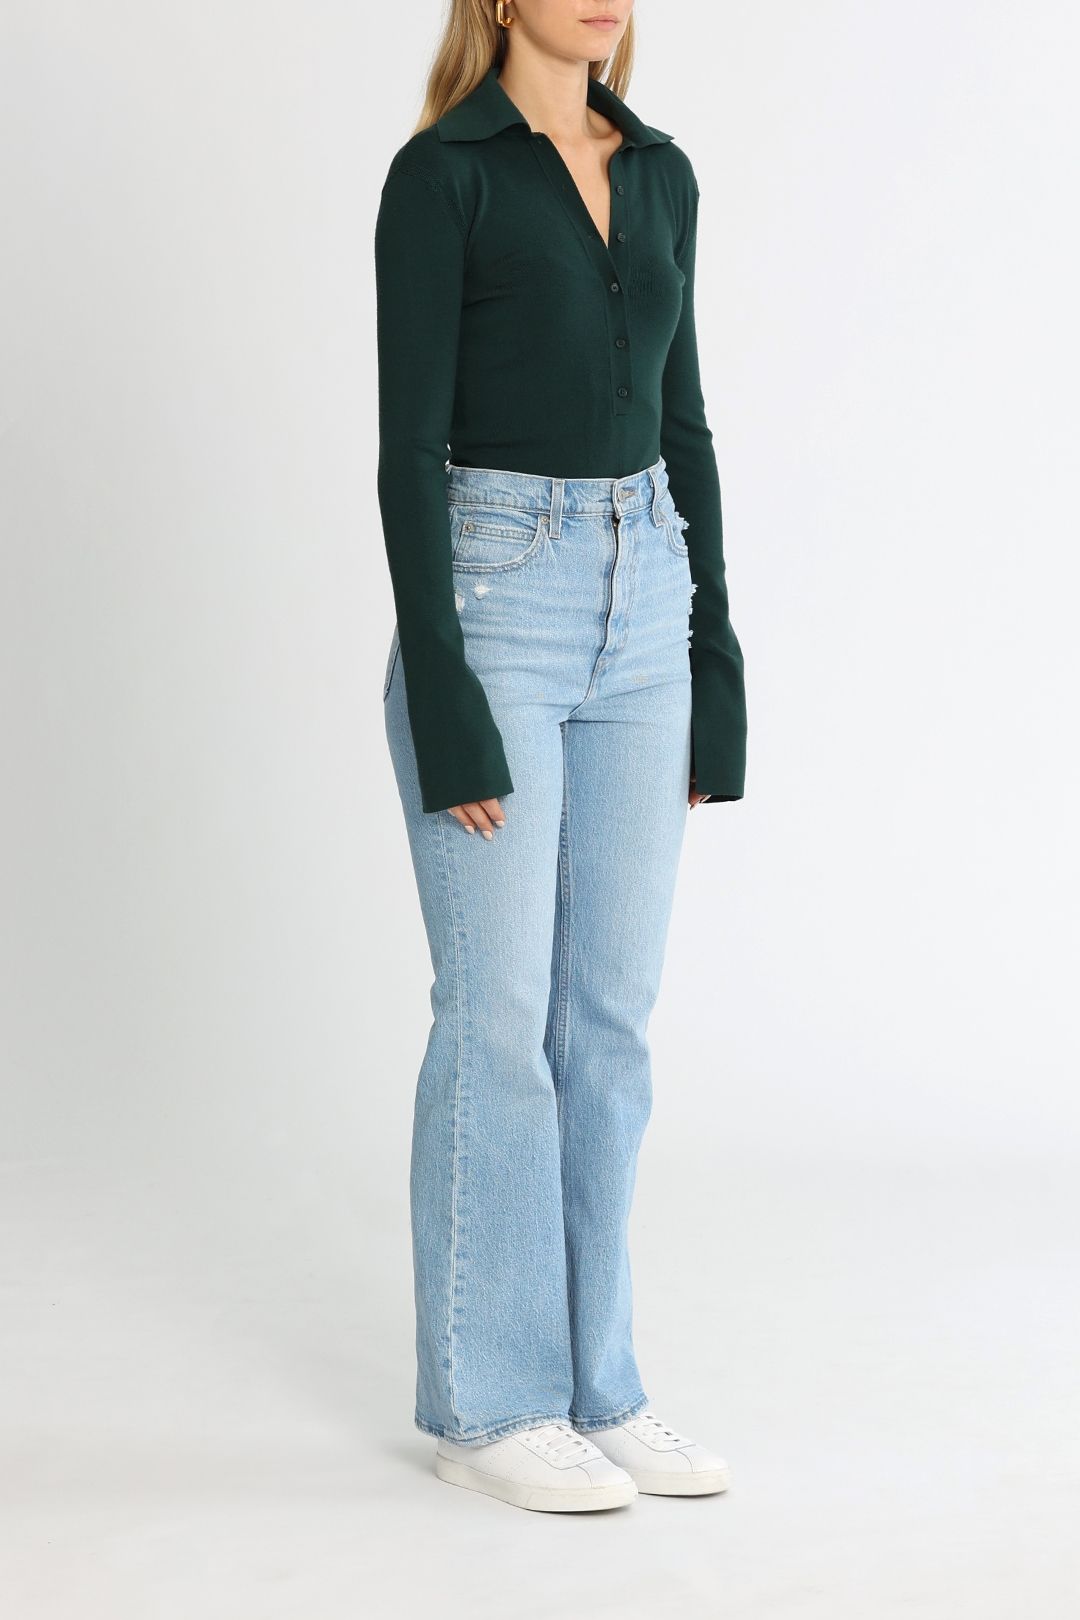 Camilla and Marc Novella Button Up Knit Top Bottle Green Long Sleeves